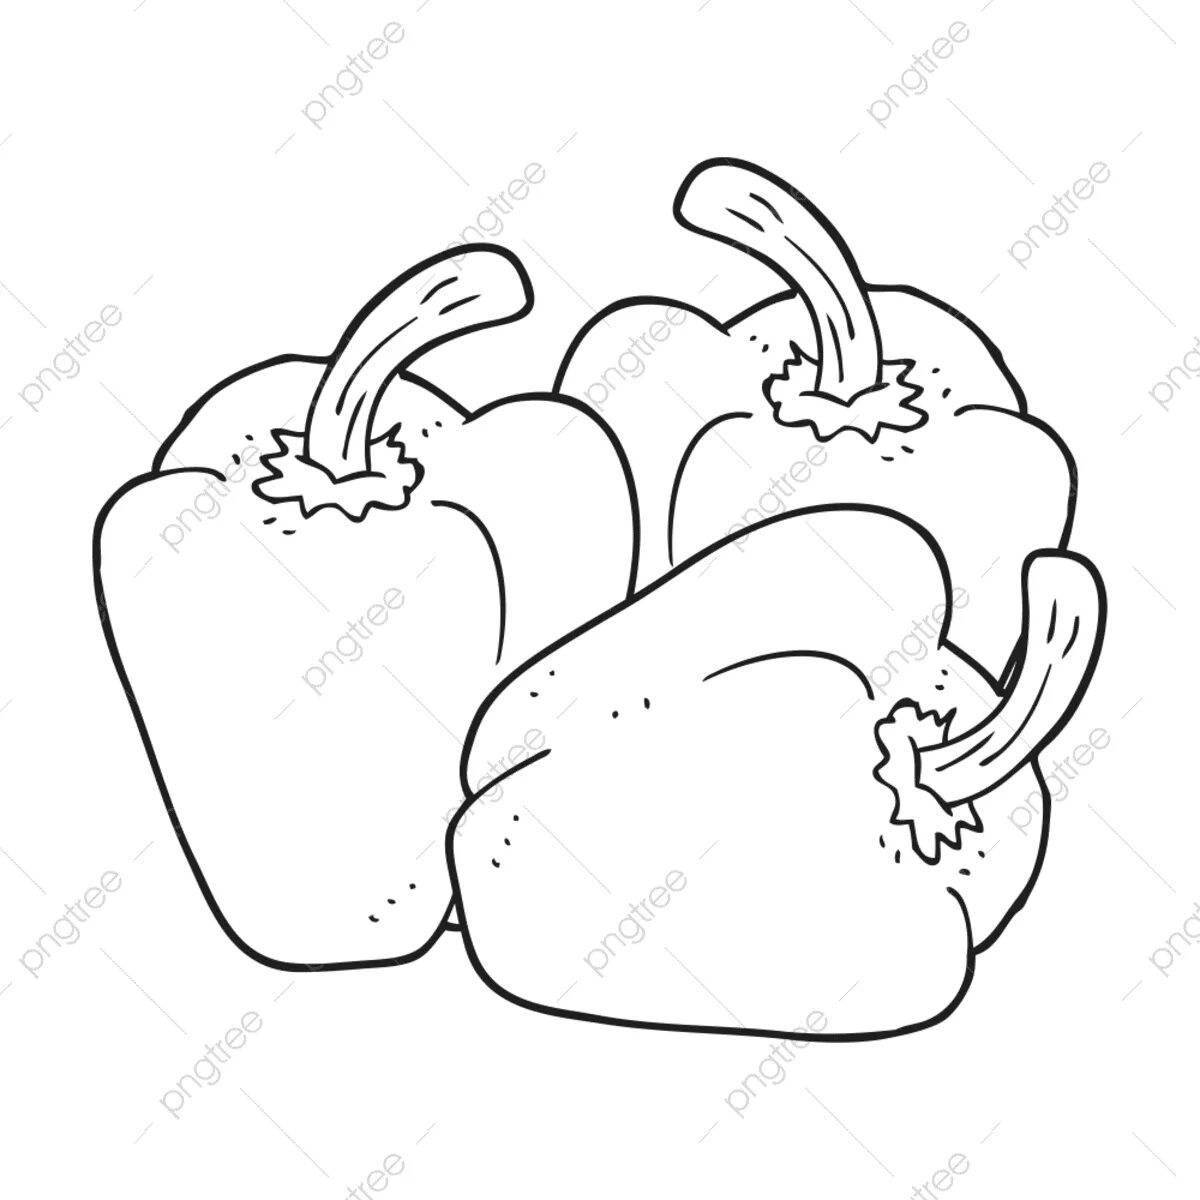 Coloring page adorable pepper for kids